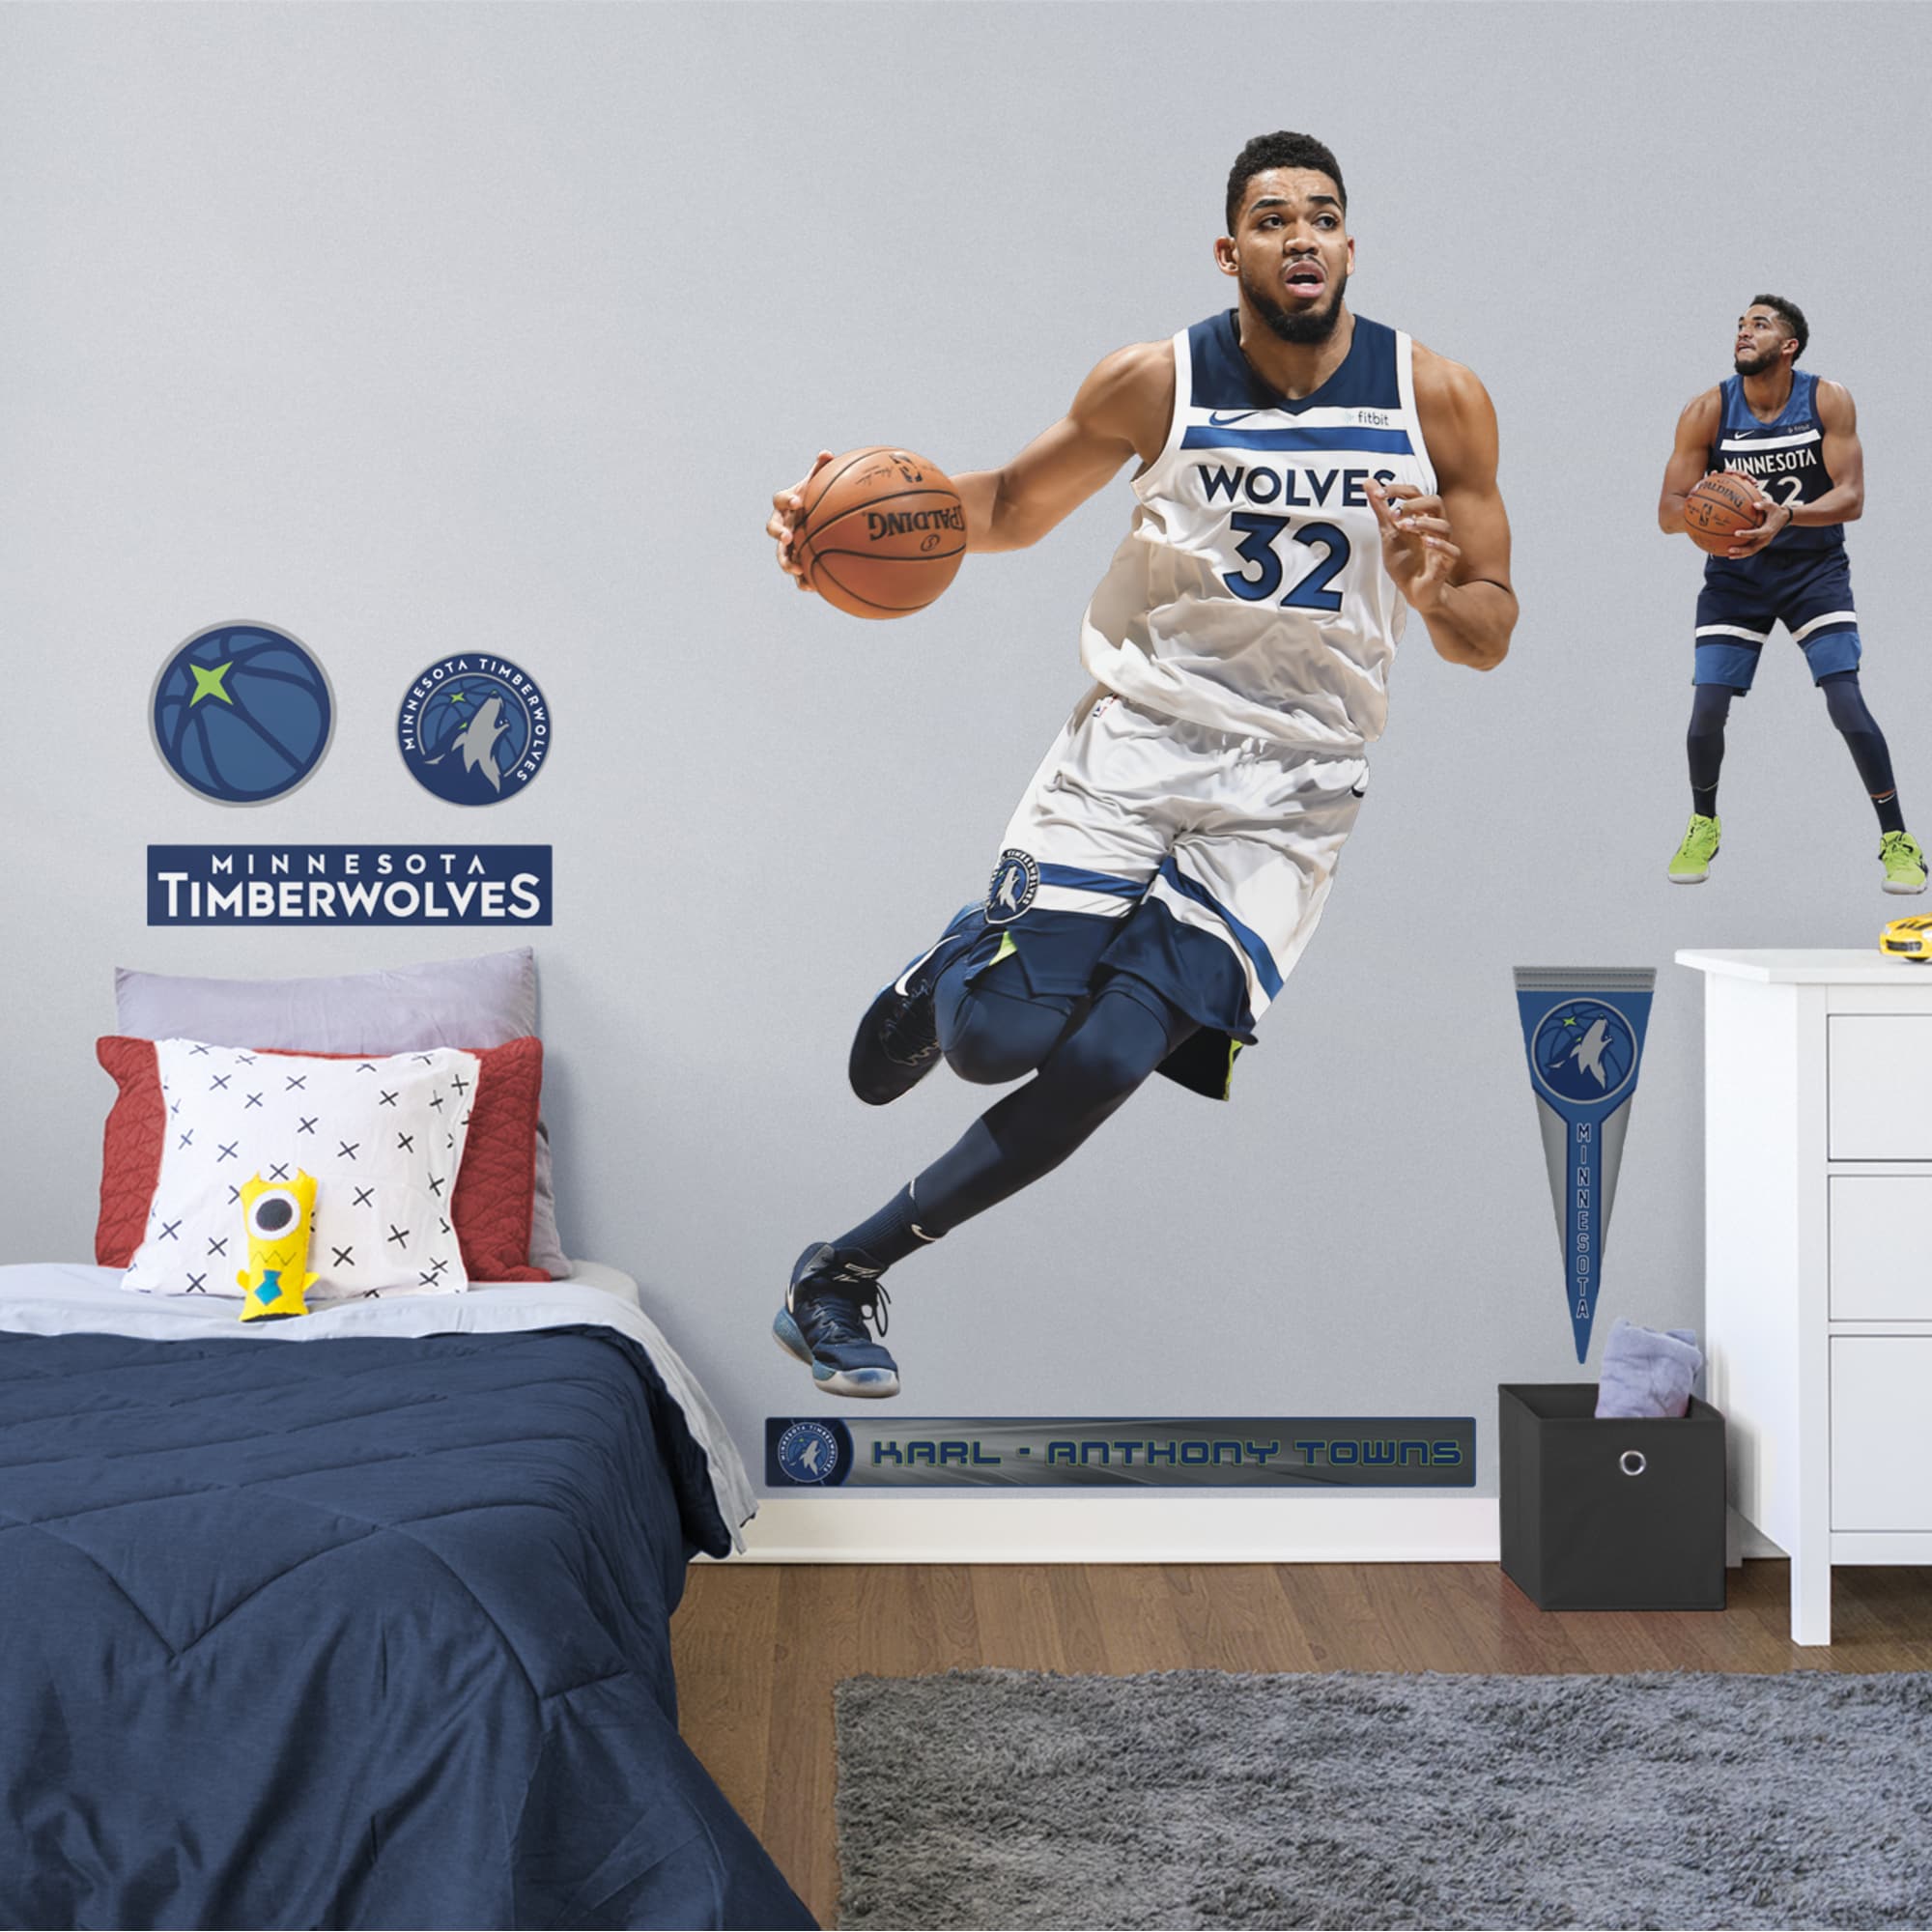 Karl-Anthony Towns for Minnesota Timberwolves - Officially Licensed NBA Removable Wall Decal Life-Size Athlete + 10 Decals (46"W